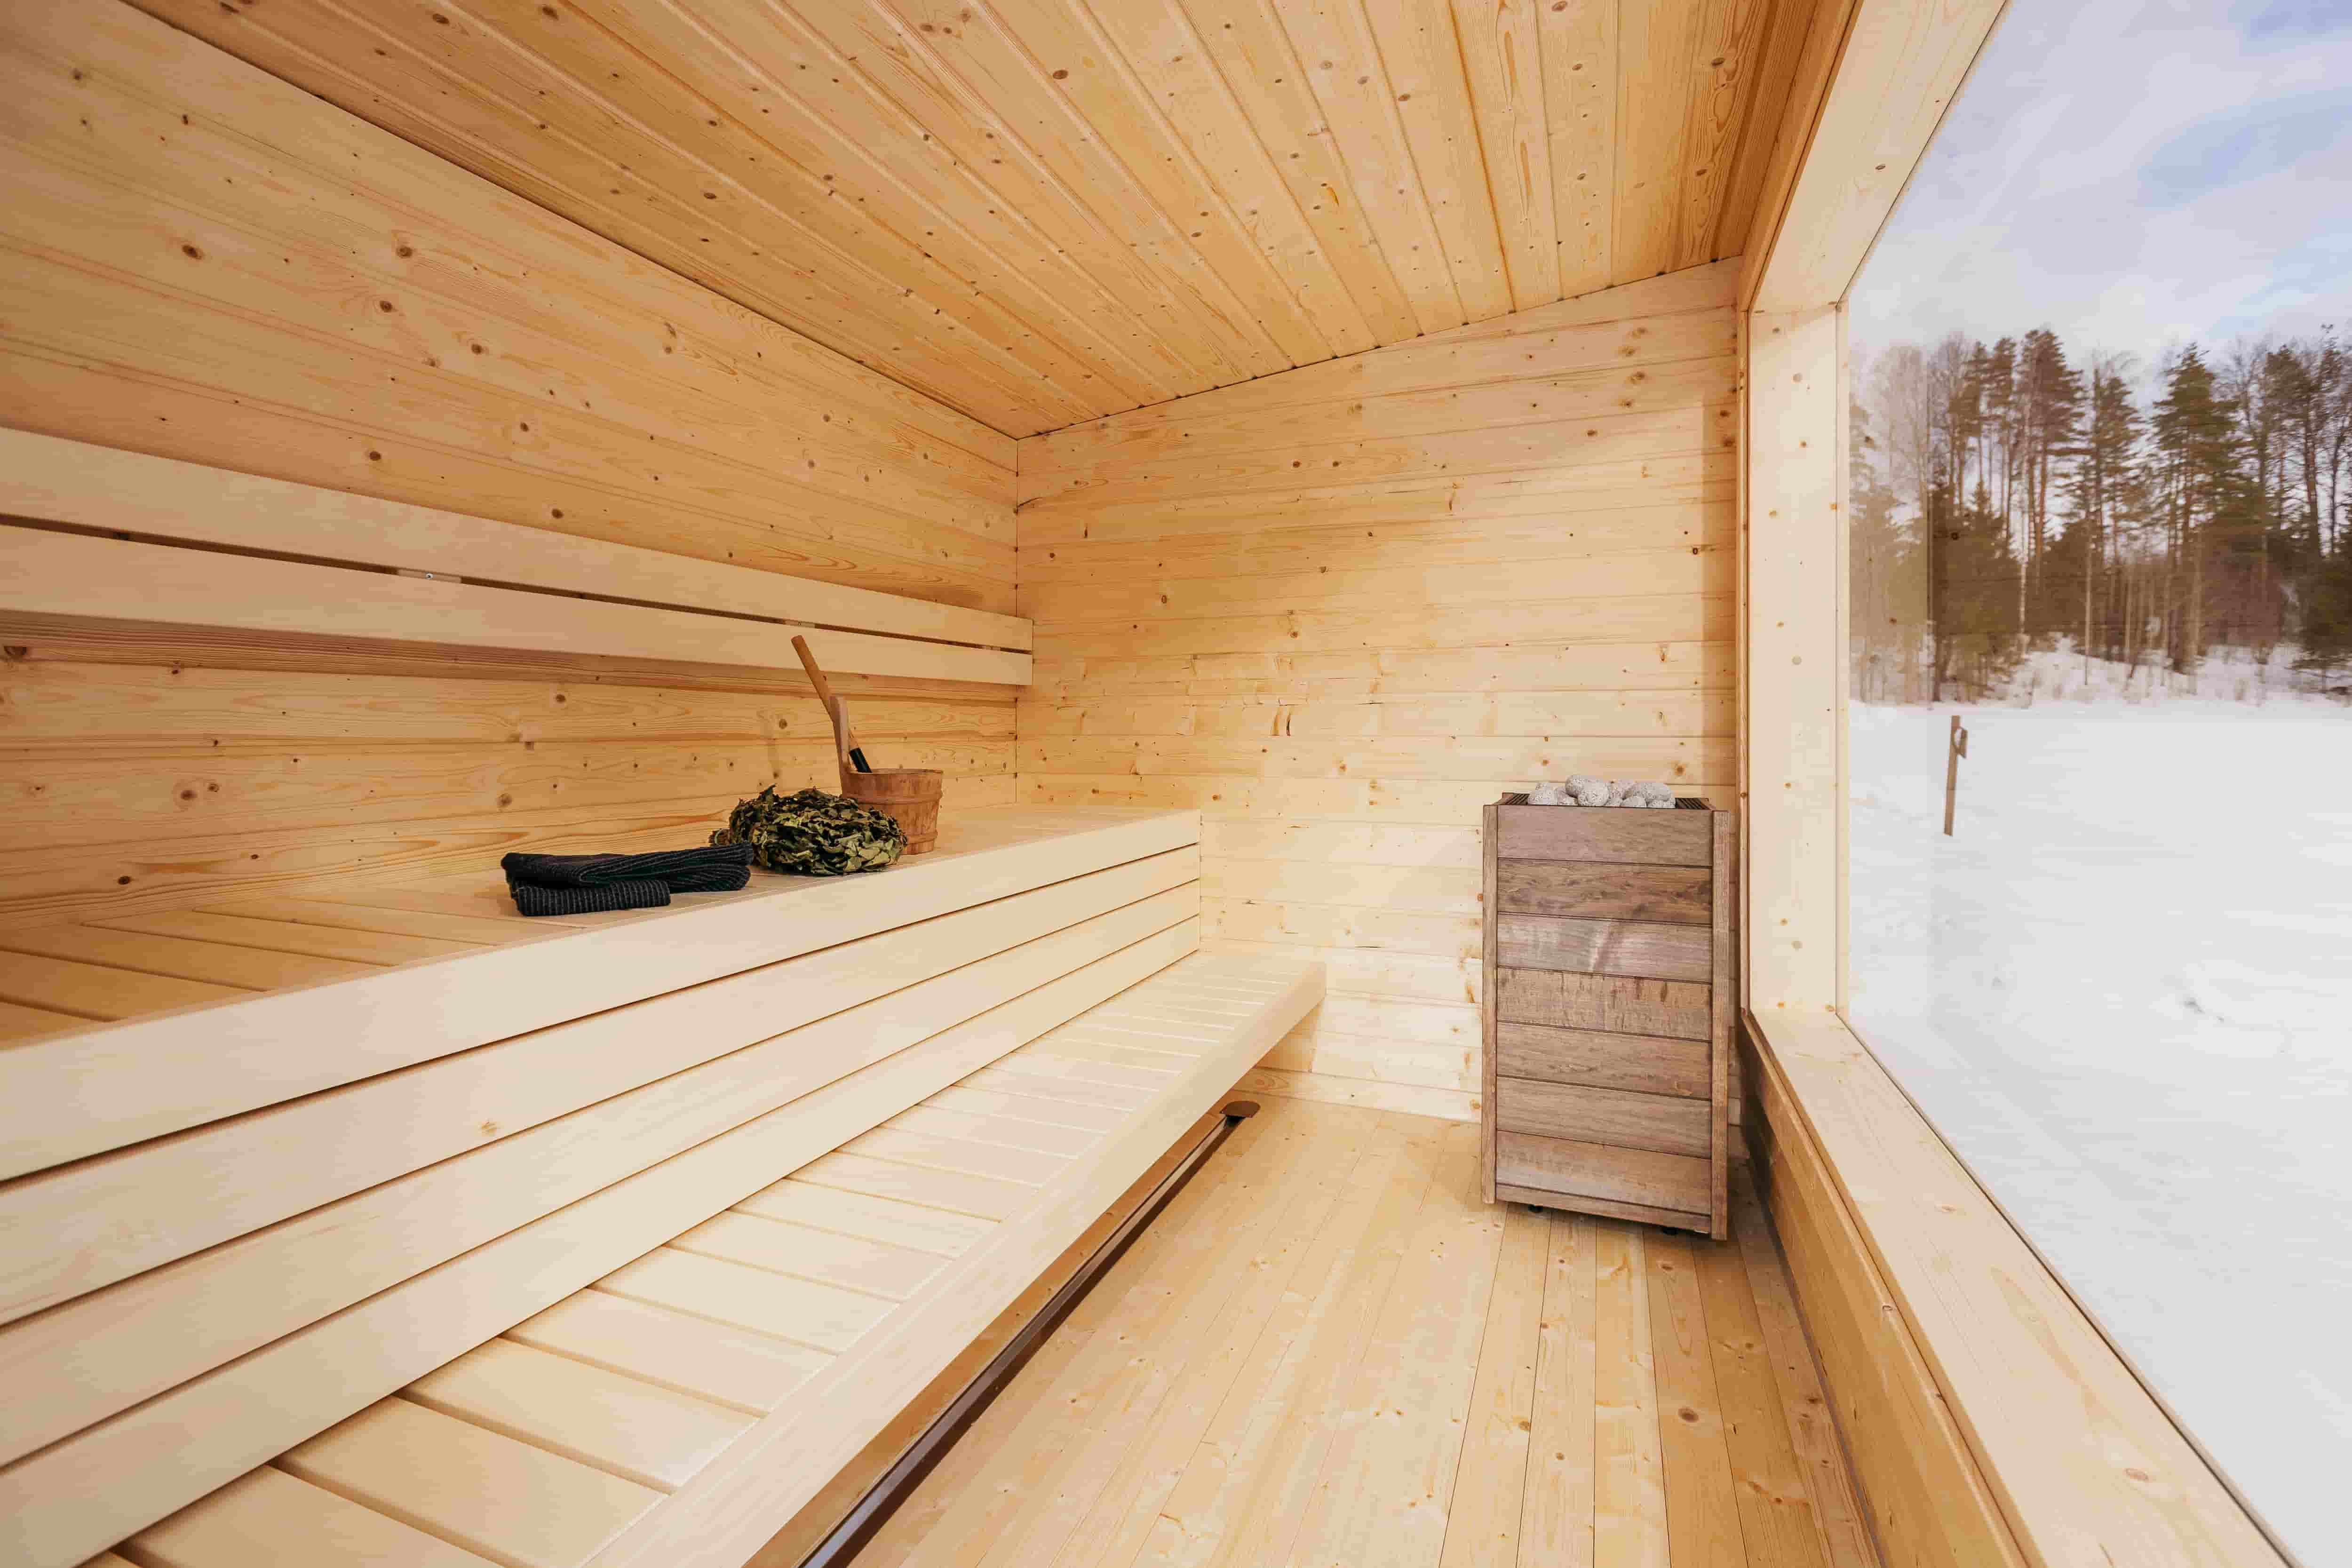 What’s The Difference Between A Traditional Sauna And An Infrared Sauna？